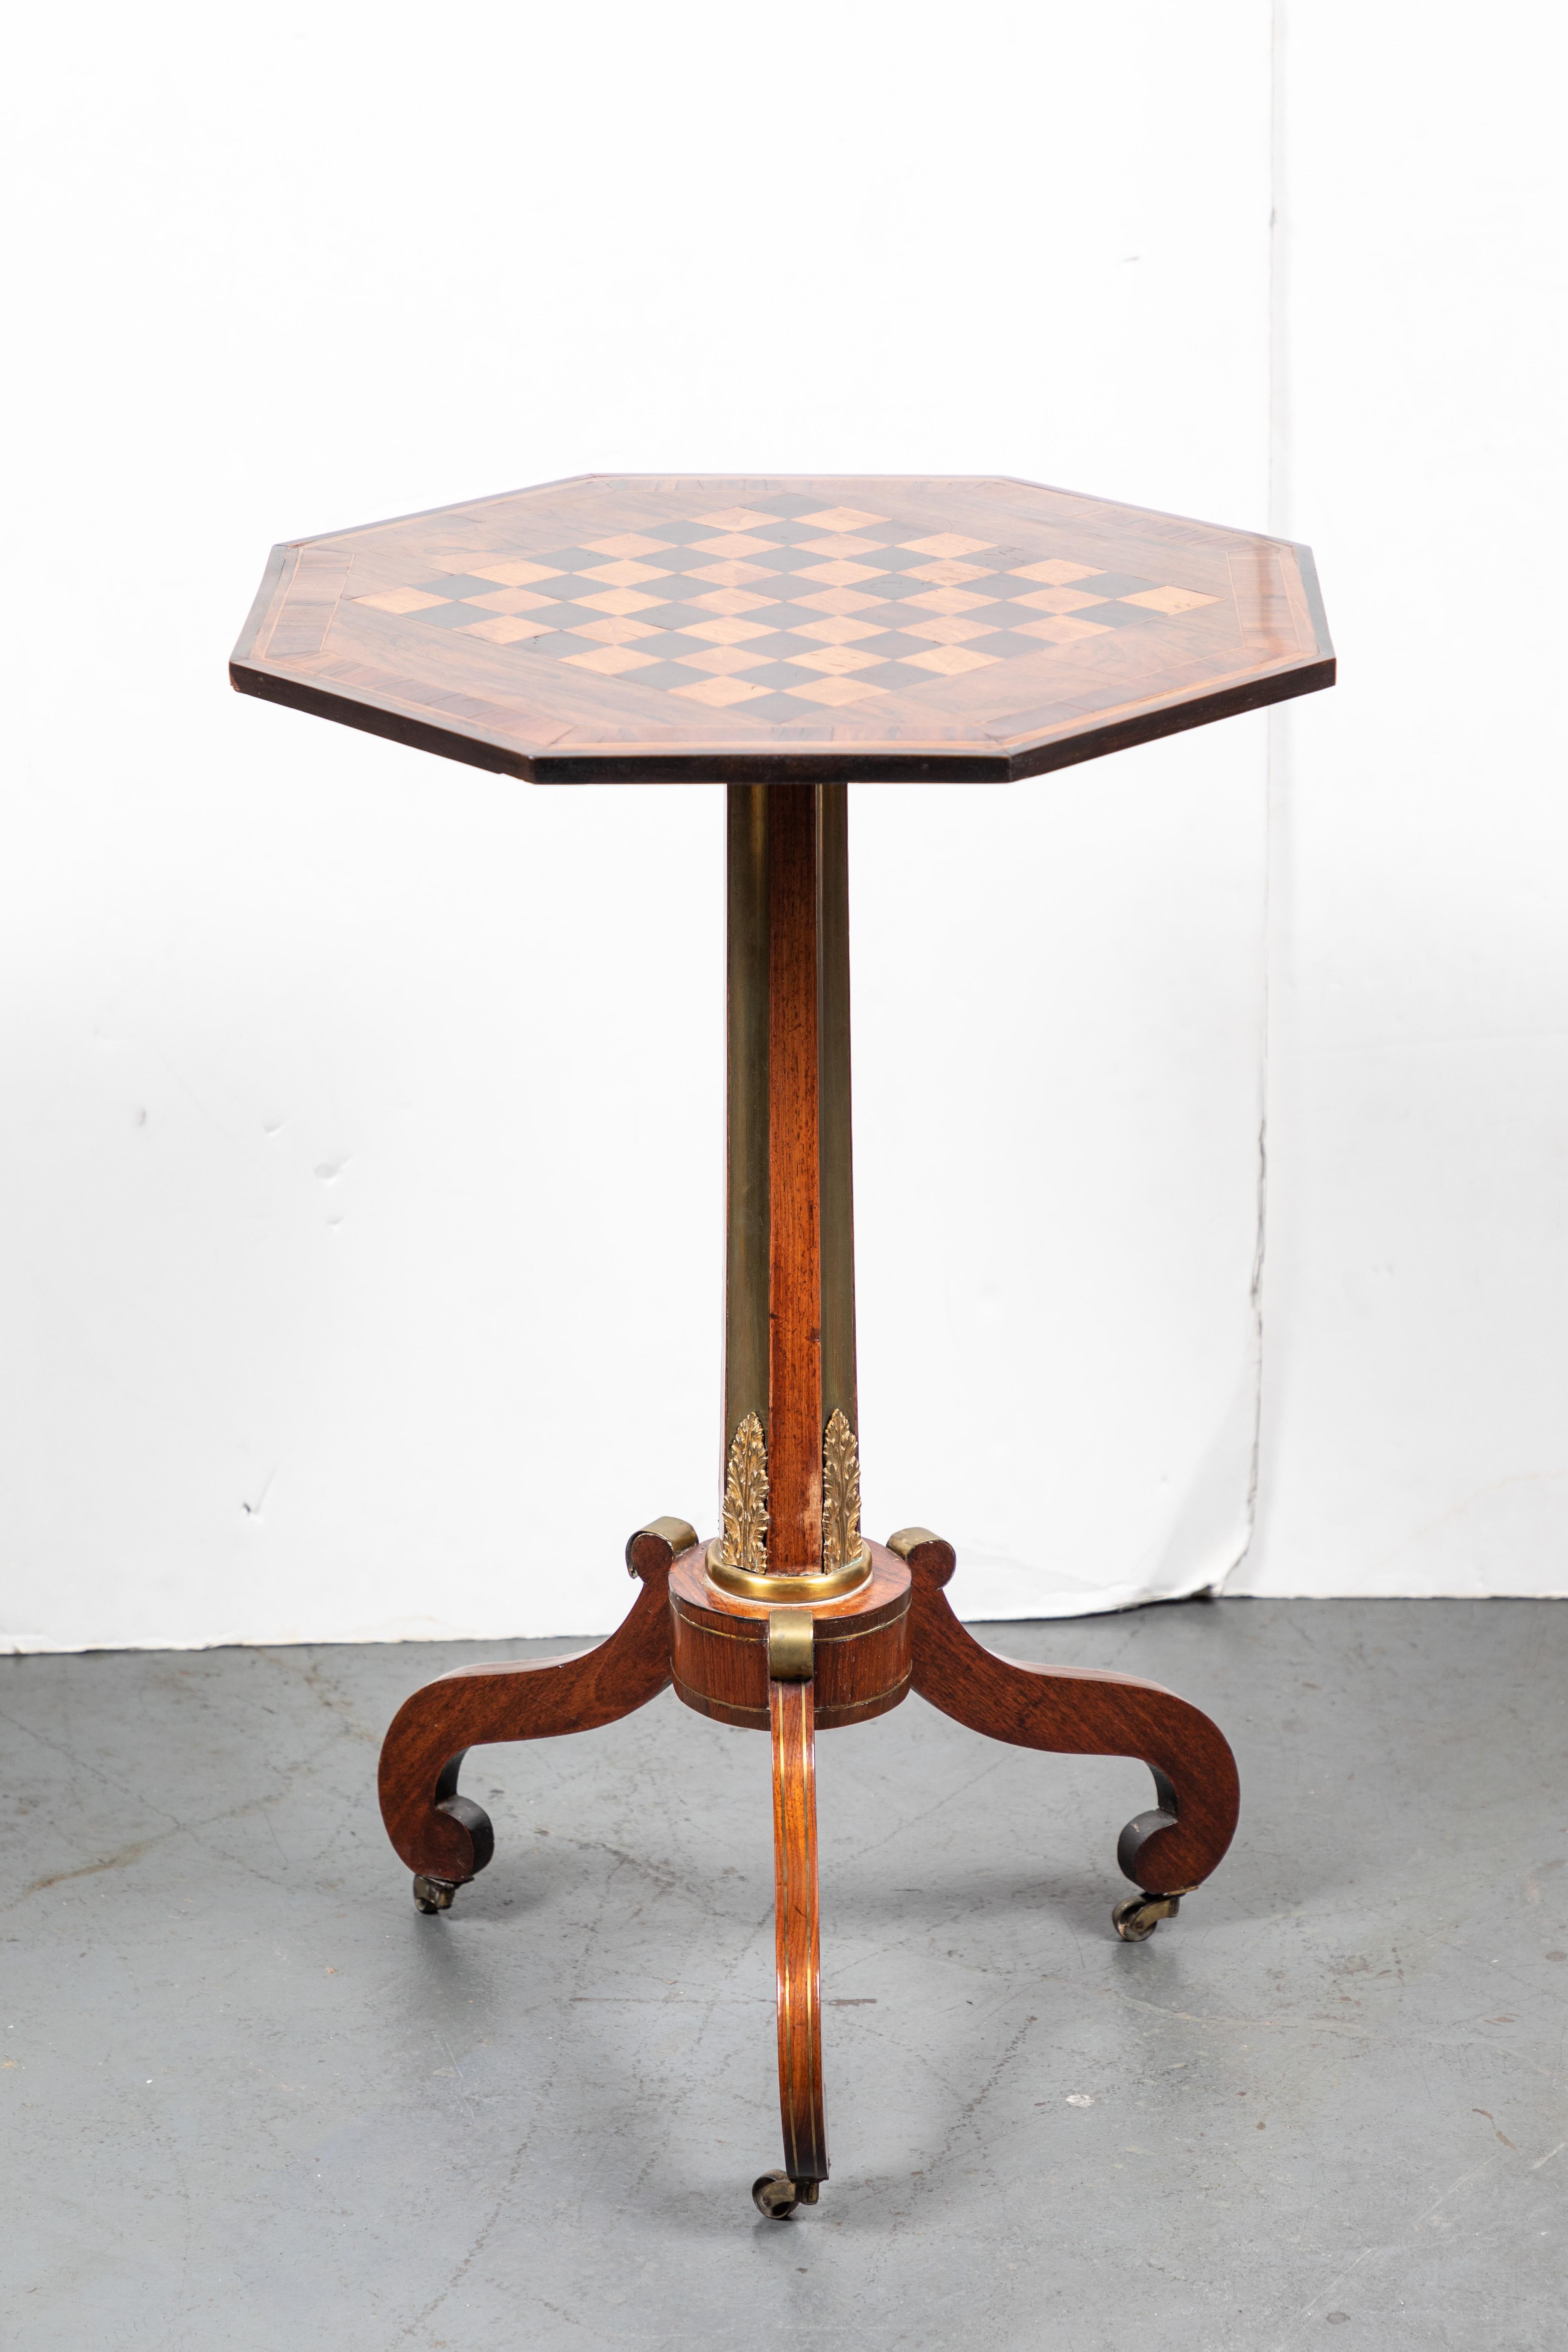 Handsome, hand carved, veneered and inlaid, walnut and mahogany, octagonal pedestal table. The checkerboard embellished top above a column inset with gilt brass, and mounted on three, serpentine legs inlaid with brass veins and terminating in